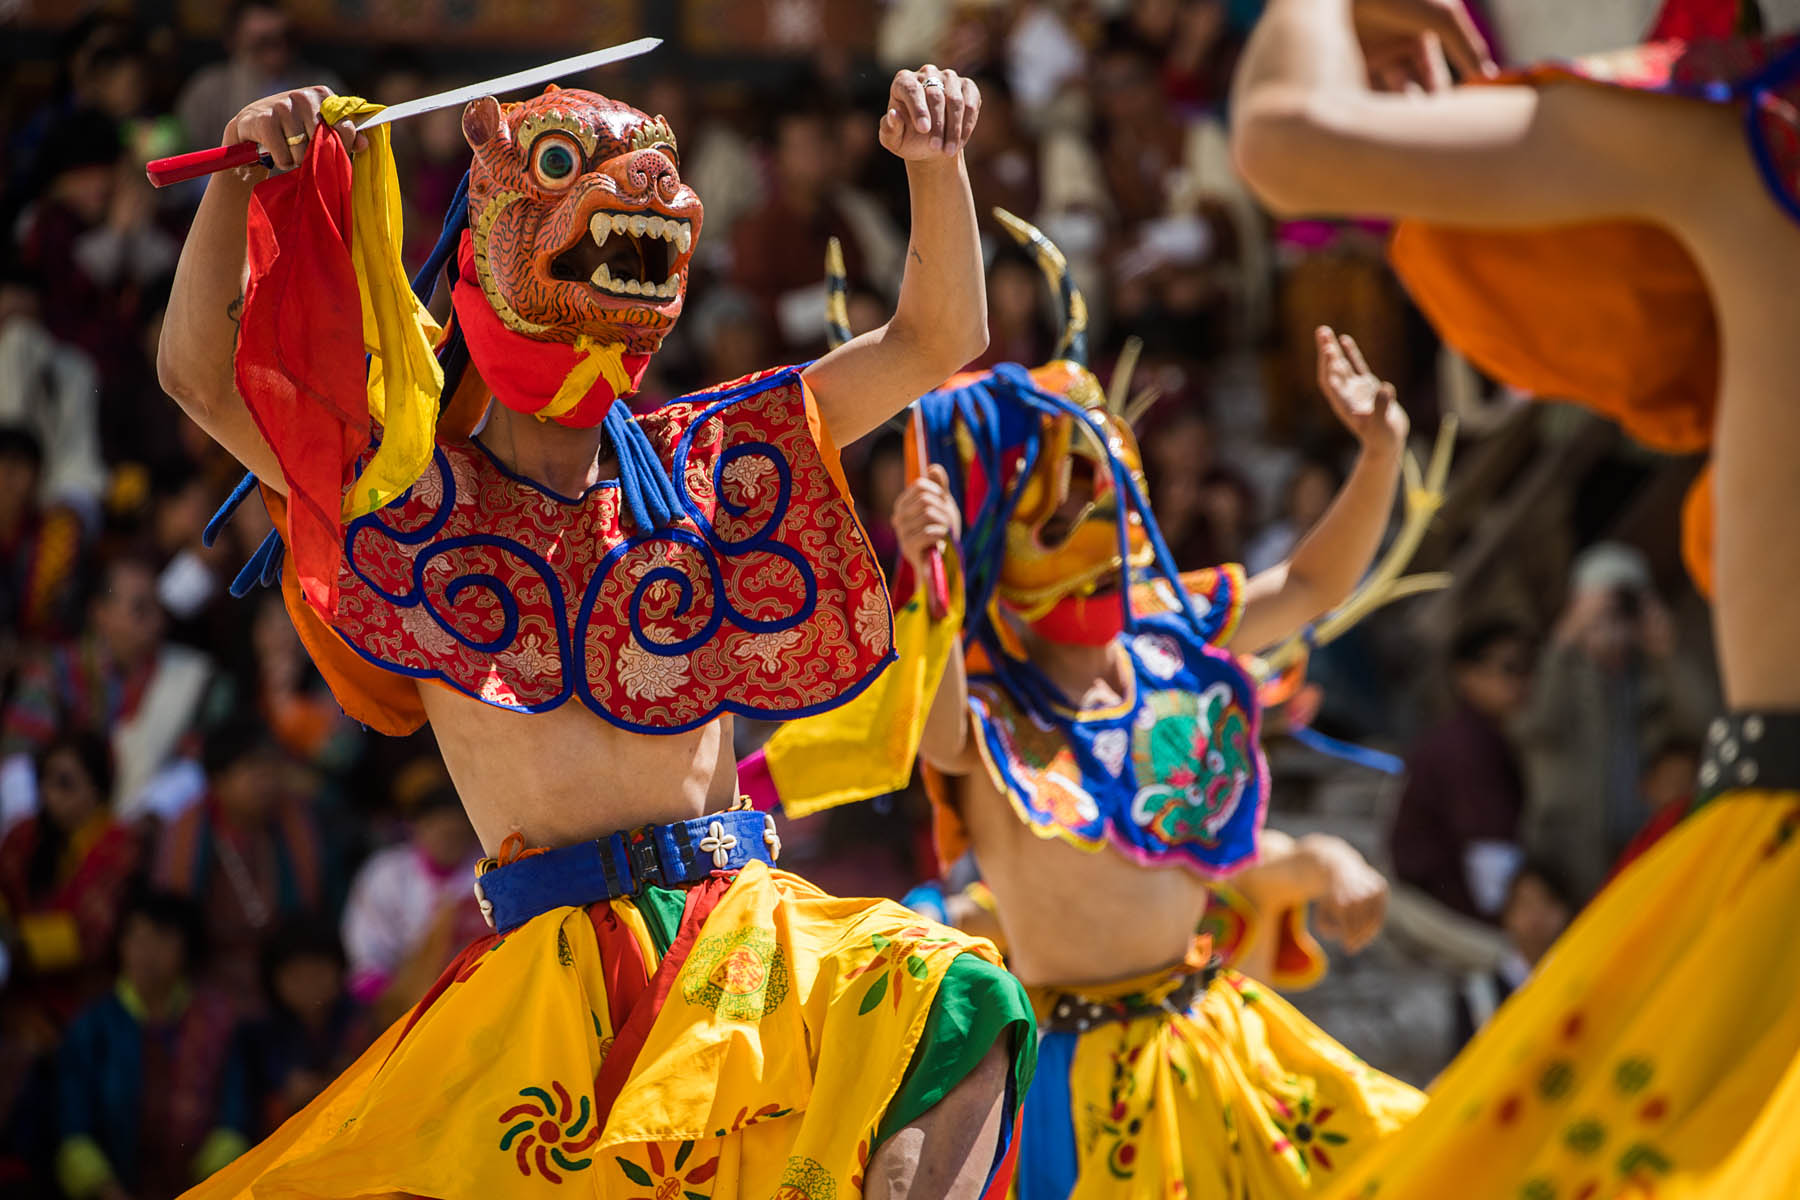 The Tsechu (festival) in Paro (Bhutan), with dances featuring tiger mask.